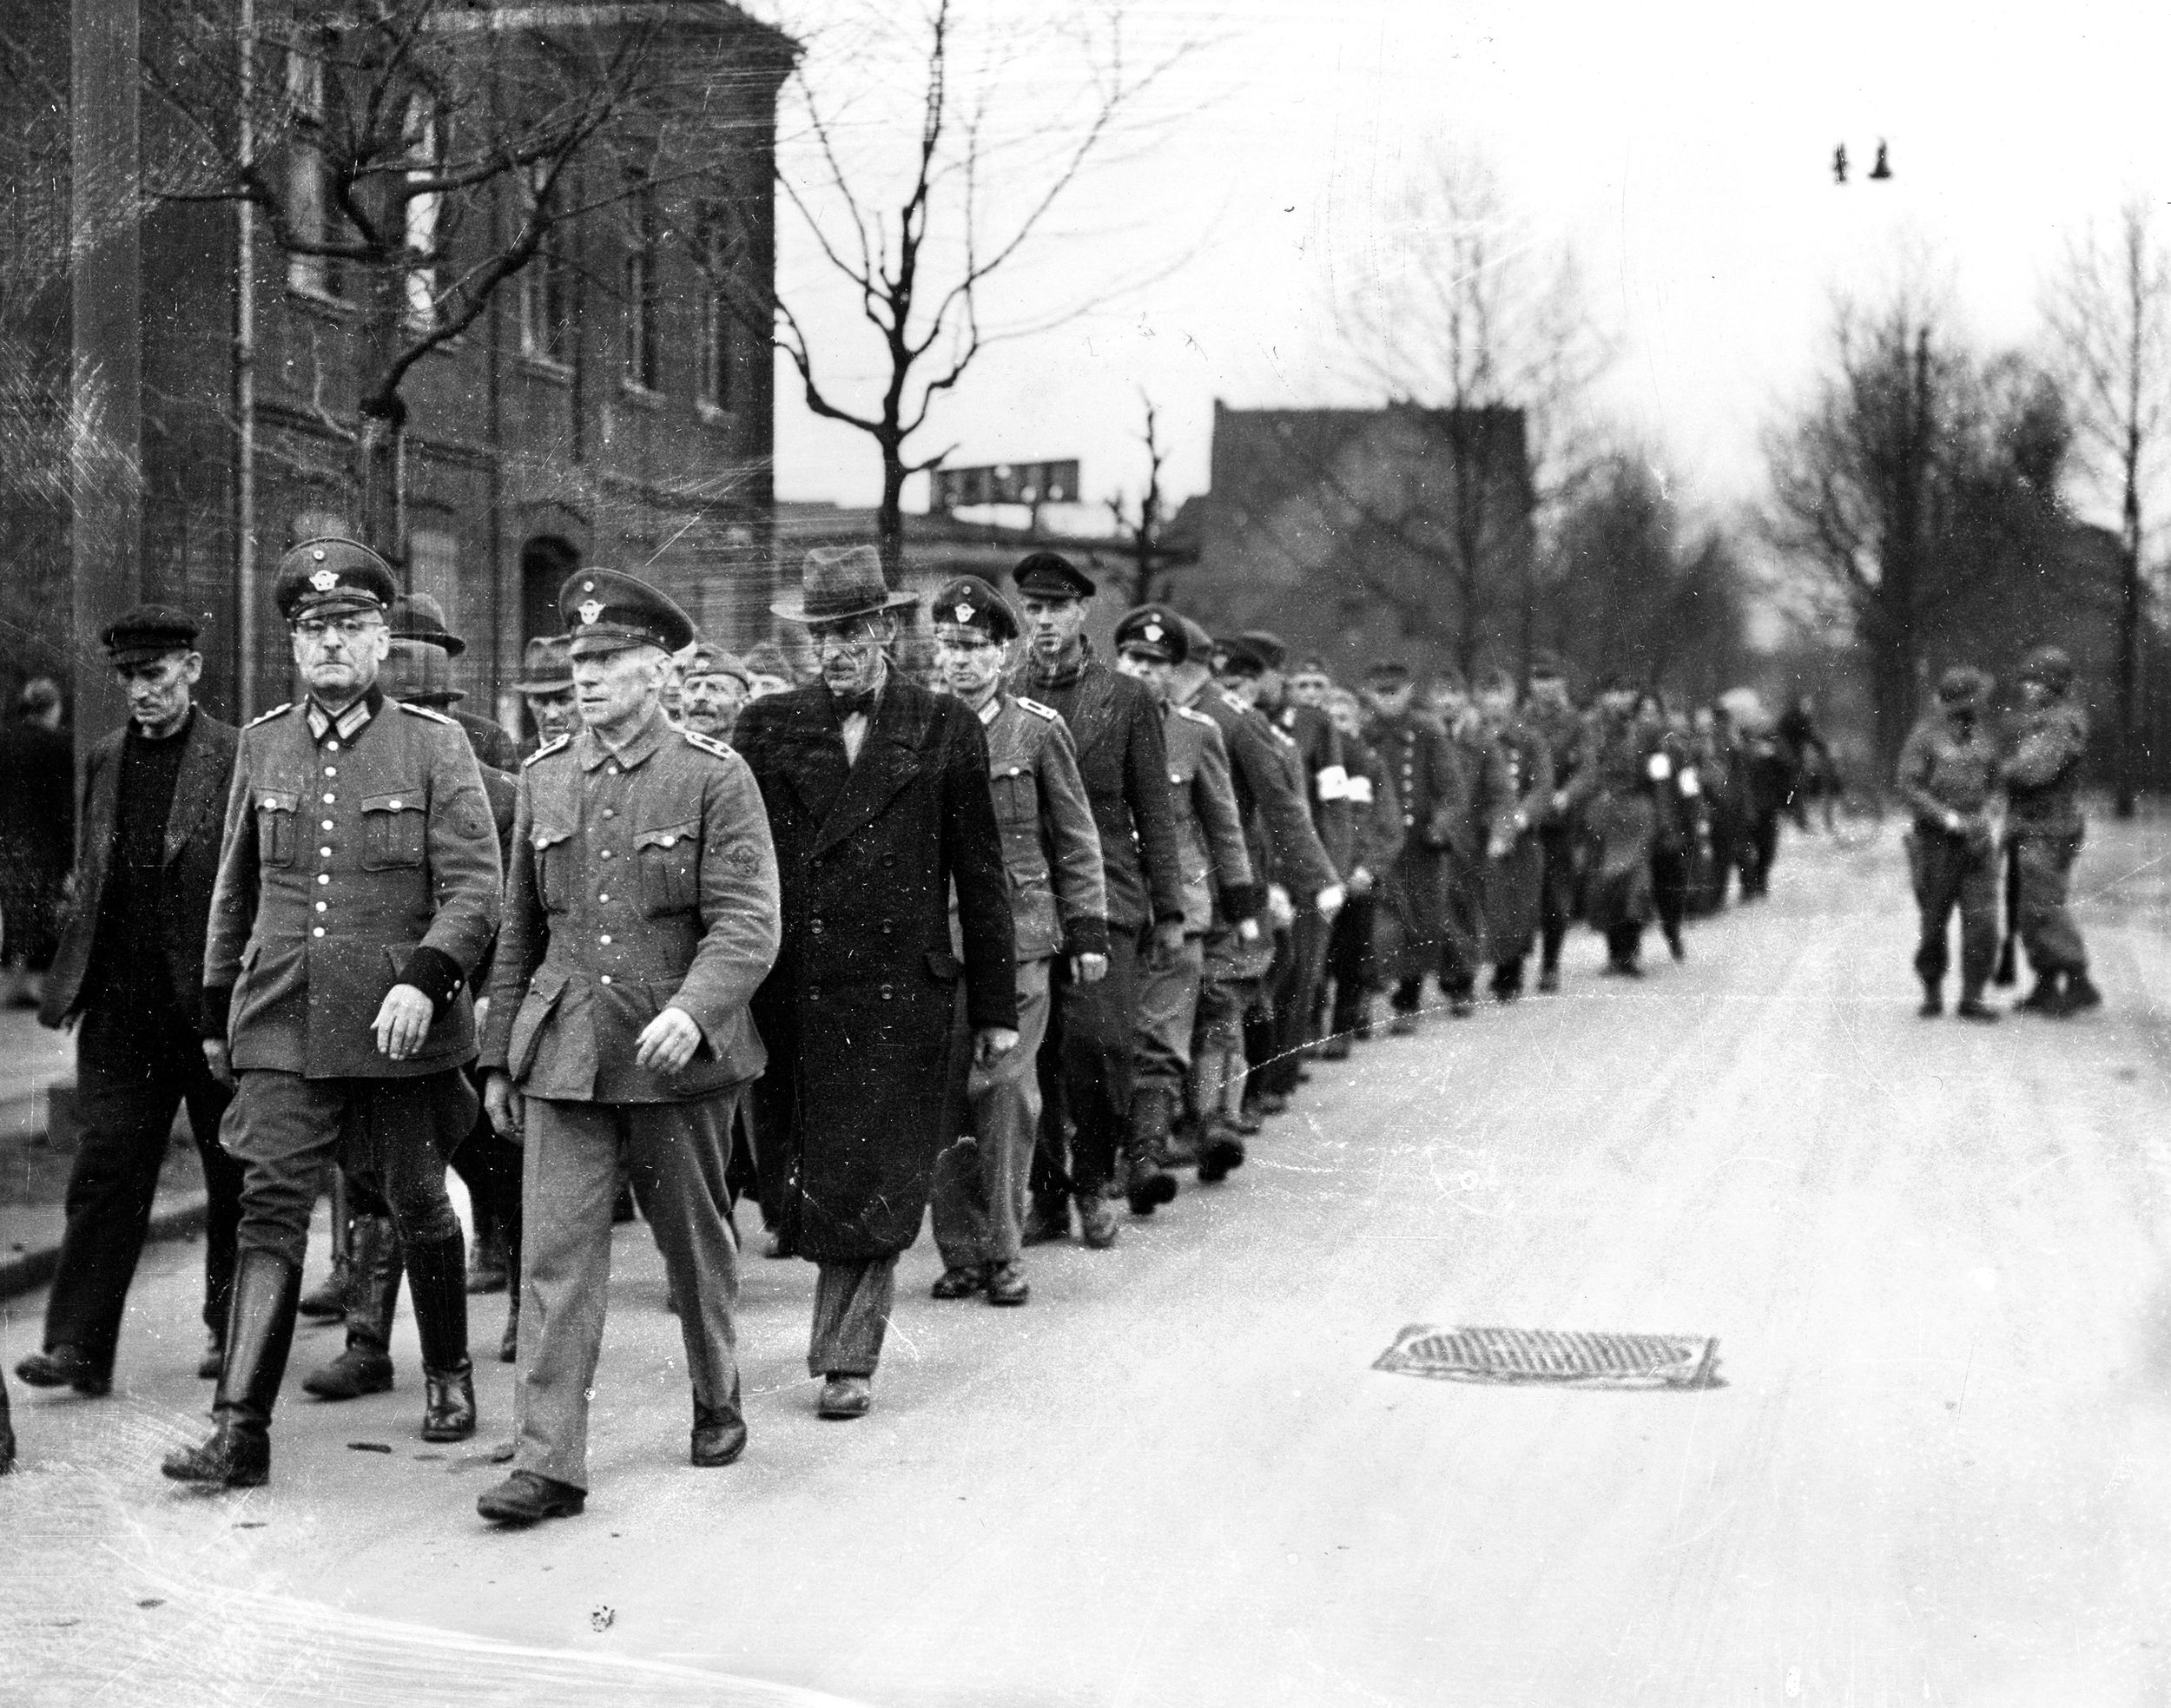 German prisoners, in various uniforms and civilian dress, march into captivity. Cohn found himself in charge of a group of surrendering Volksturm that an American POW camp did not want. 